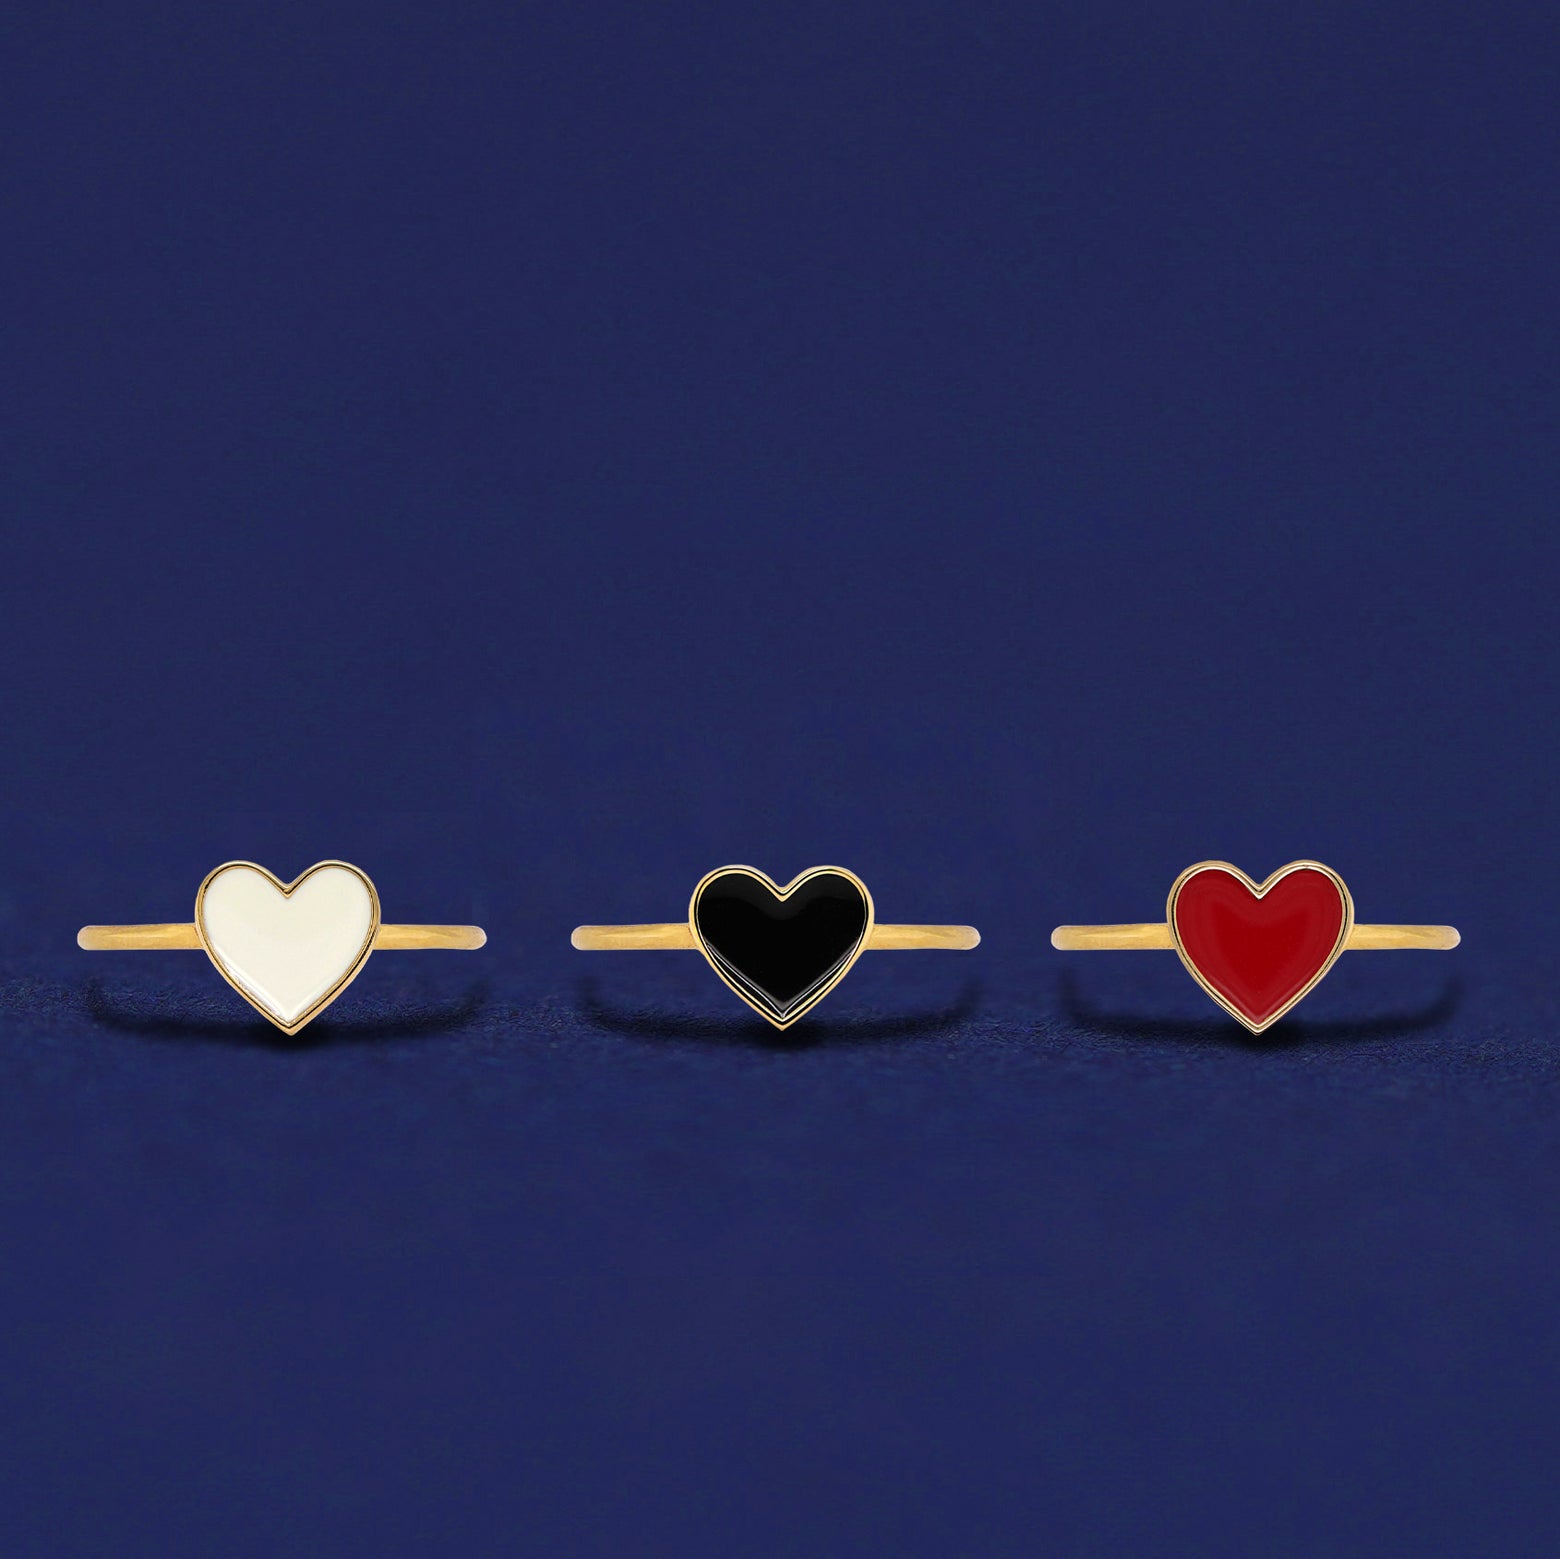 Three 14k yellow gold enamel heart rings shown in options of white, black, and red enamel